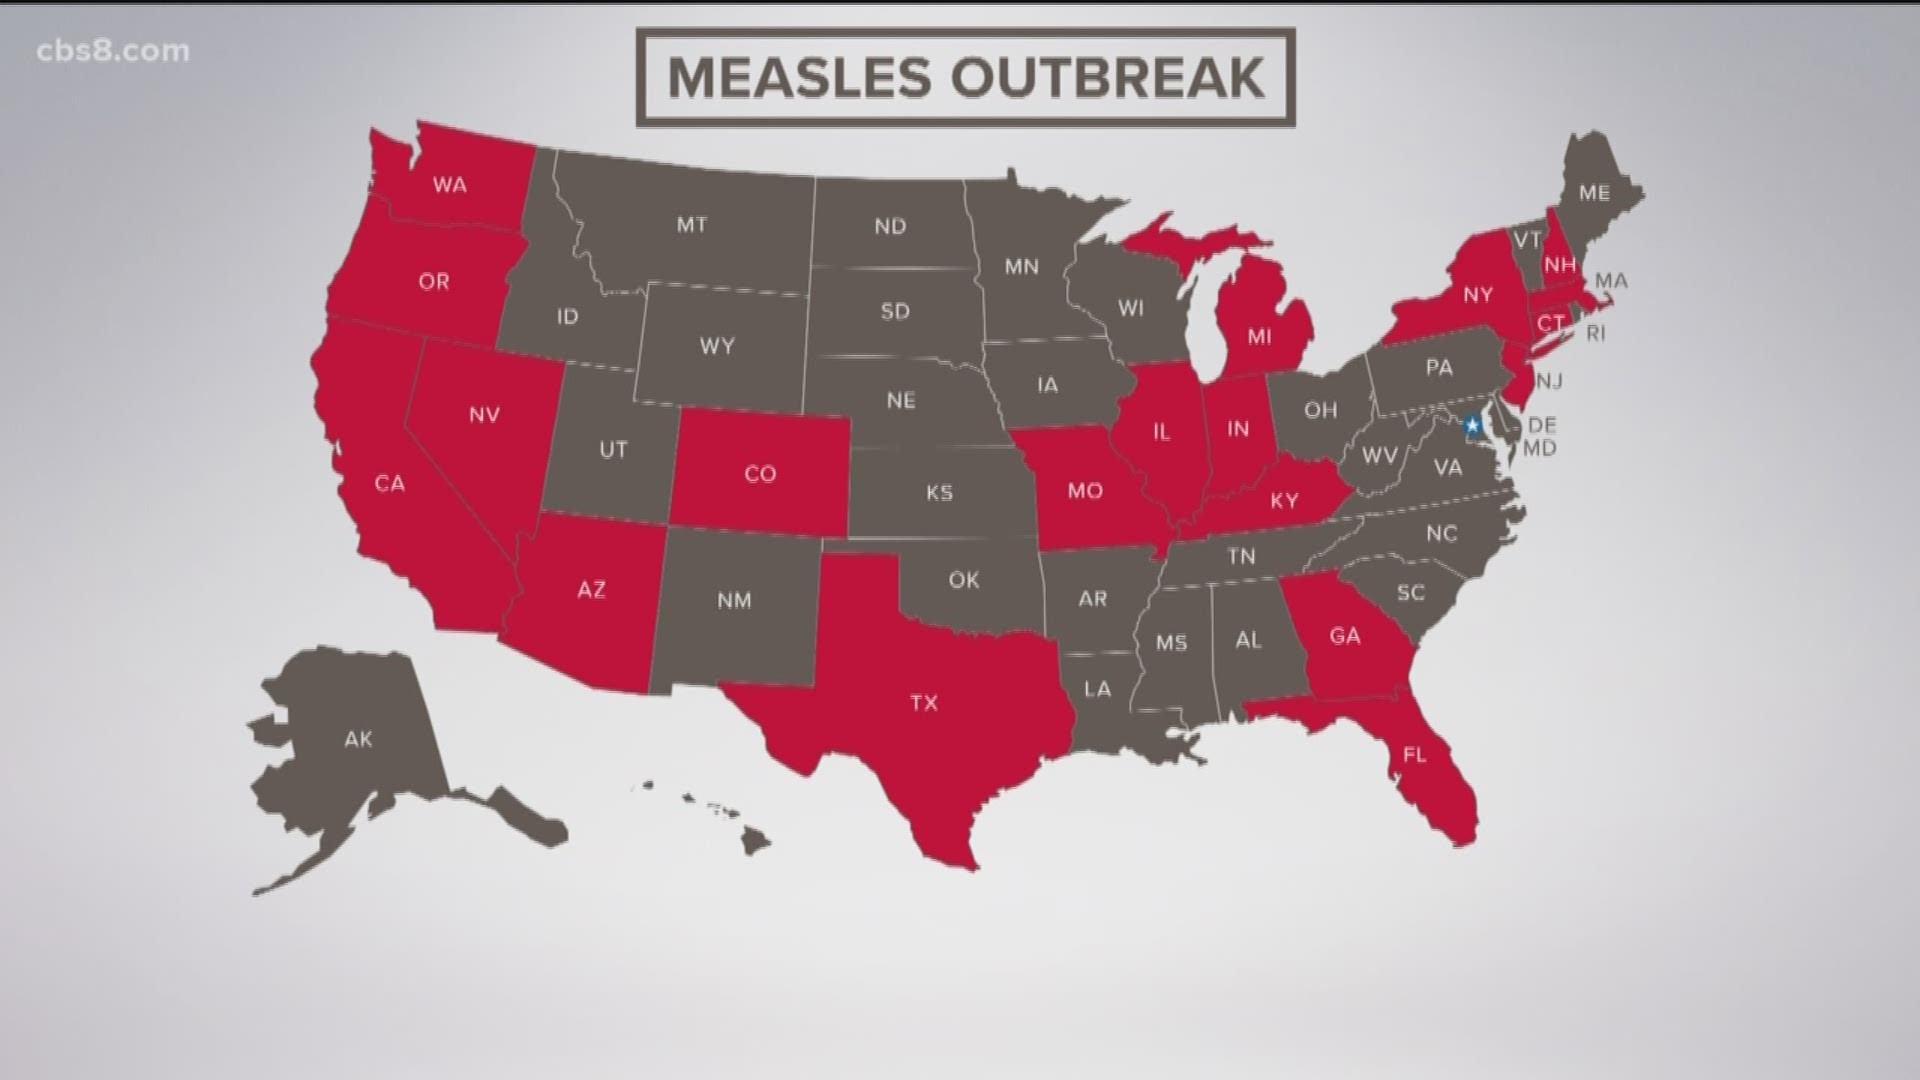 Measles outbreak in U.S. affects 20 states